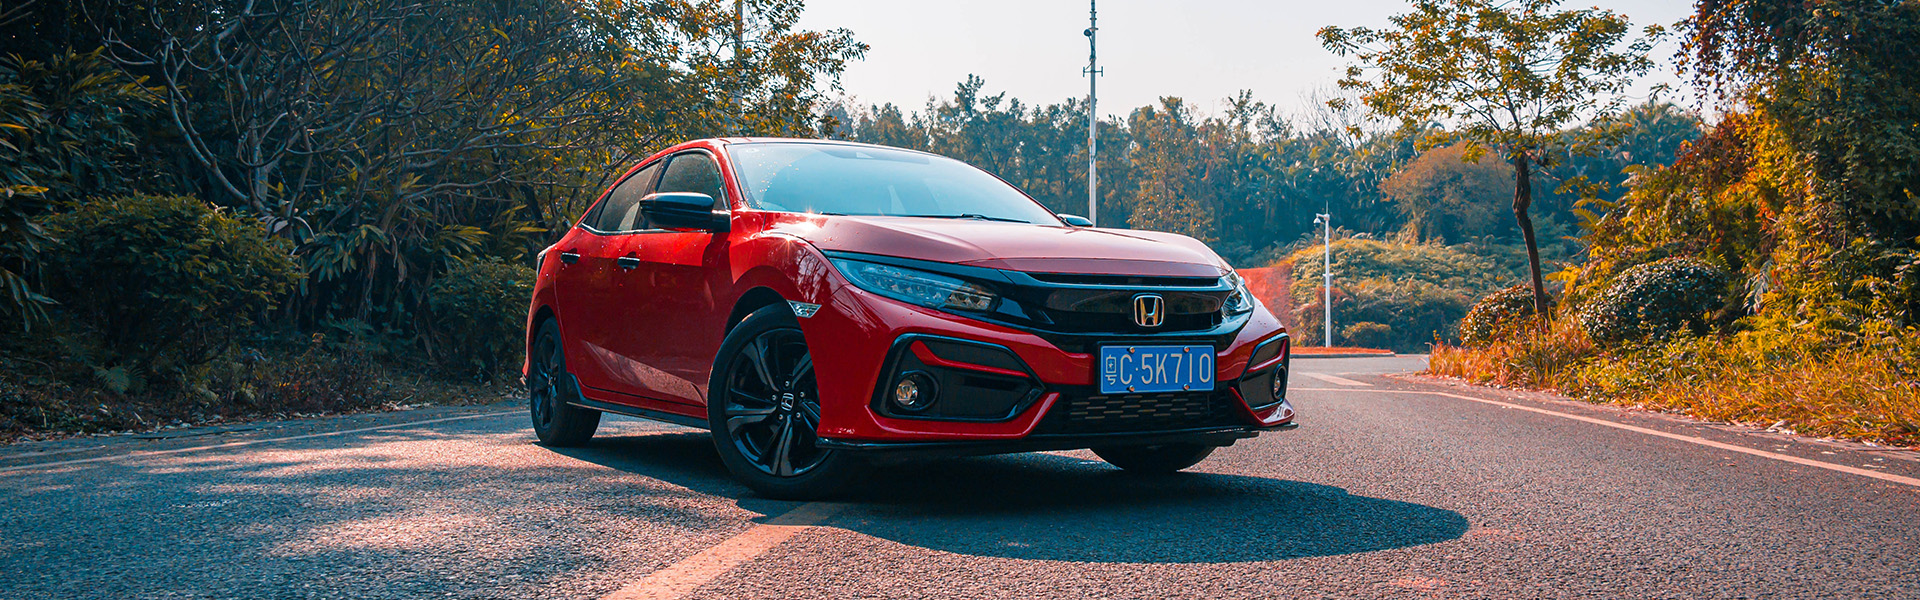 Best of Clinton is a Car Dealership near Elizabethtown, NC | Red Pre-Owned Honda Civic Parked on Road